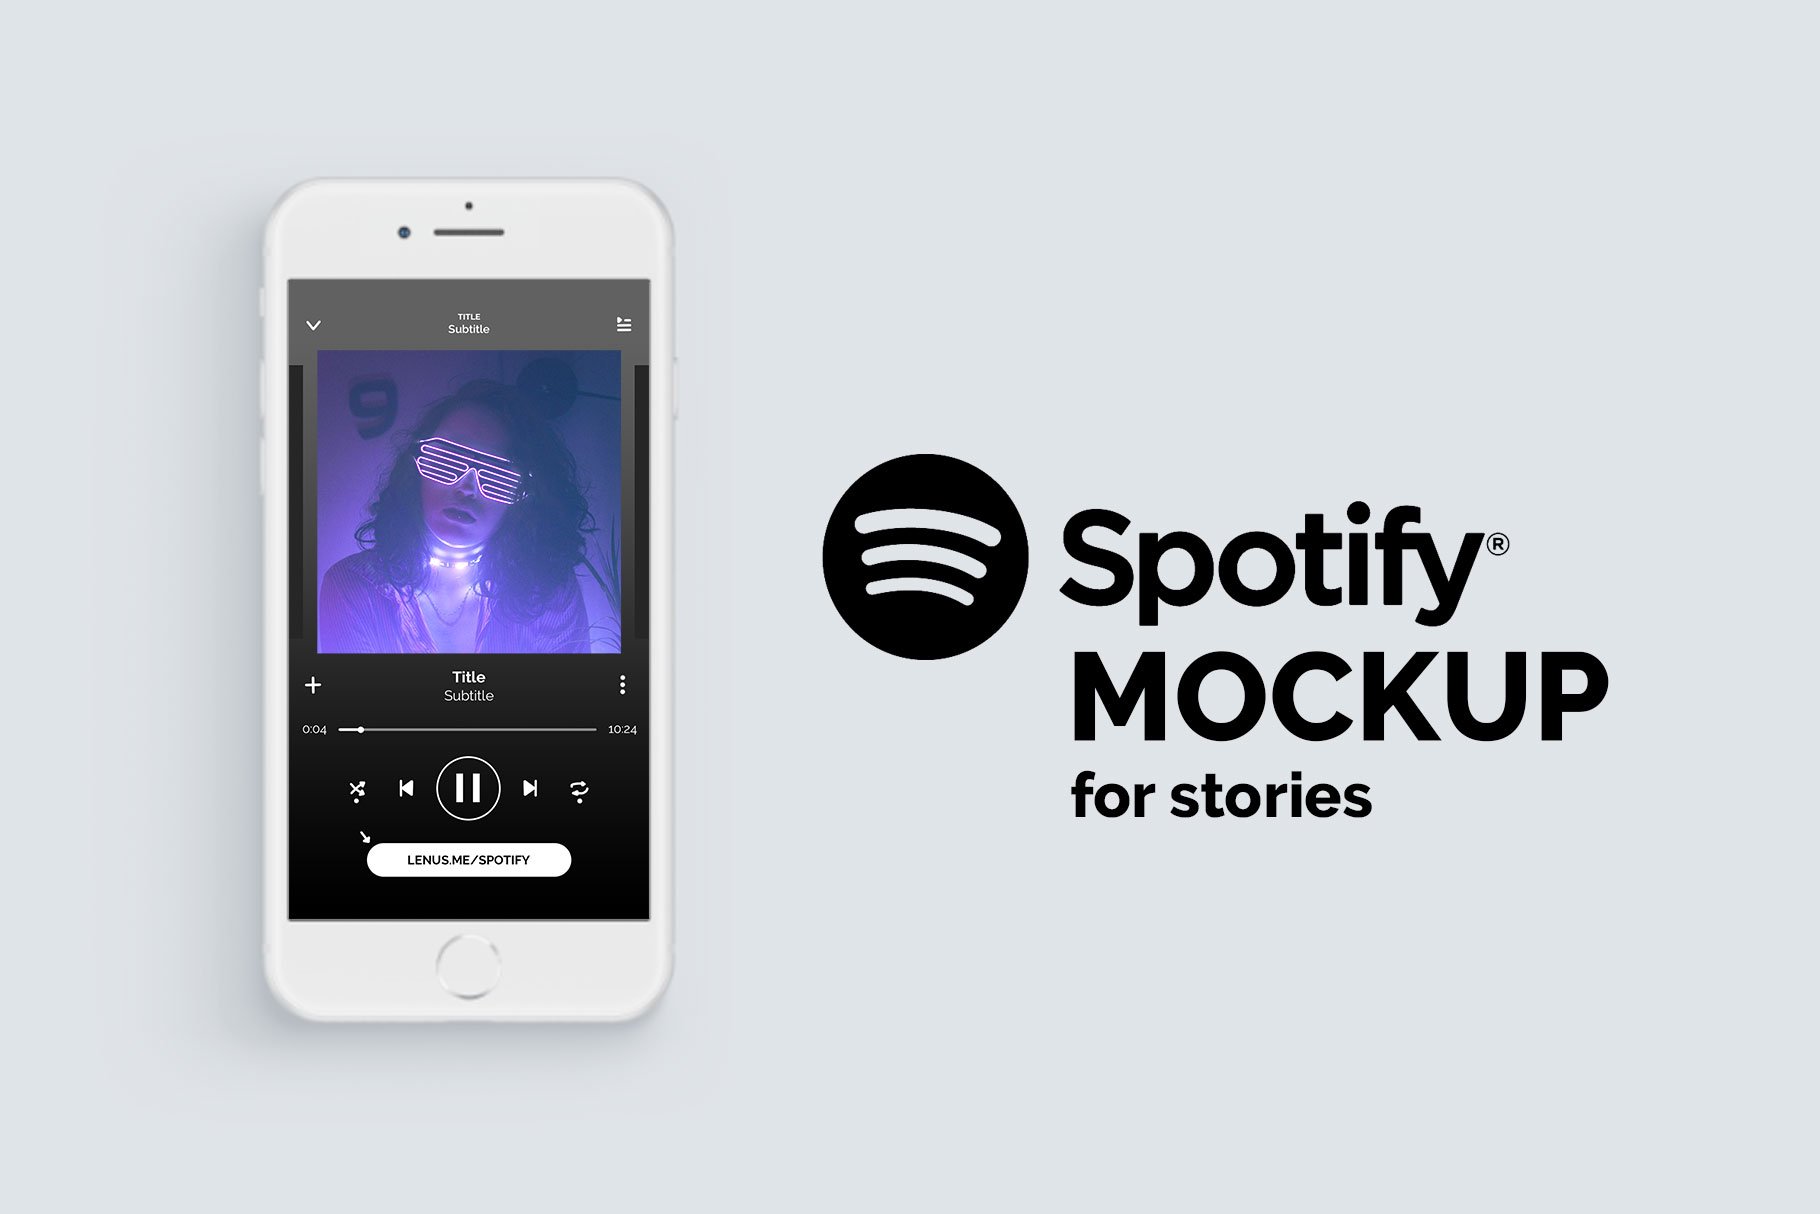 Spotify Mockup for Instagram Stories cover image.